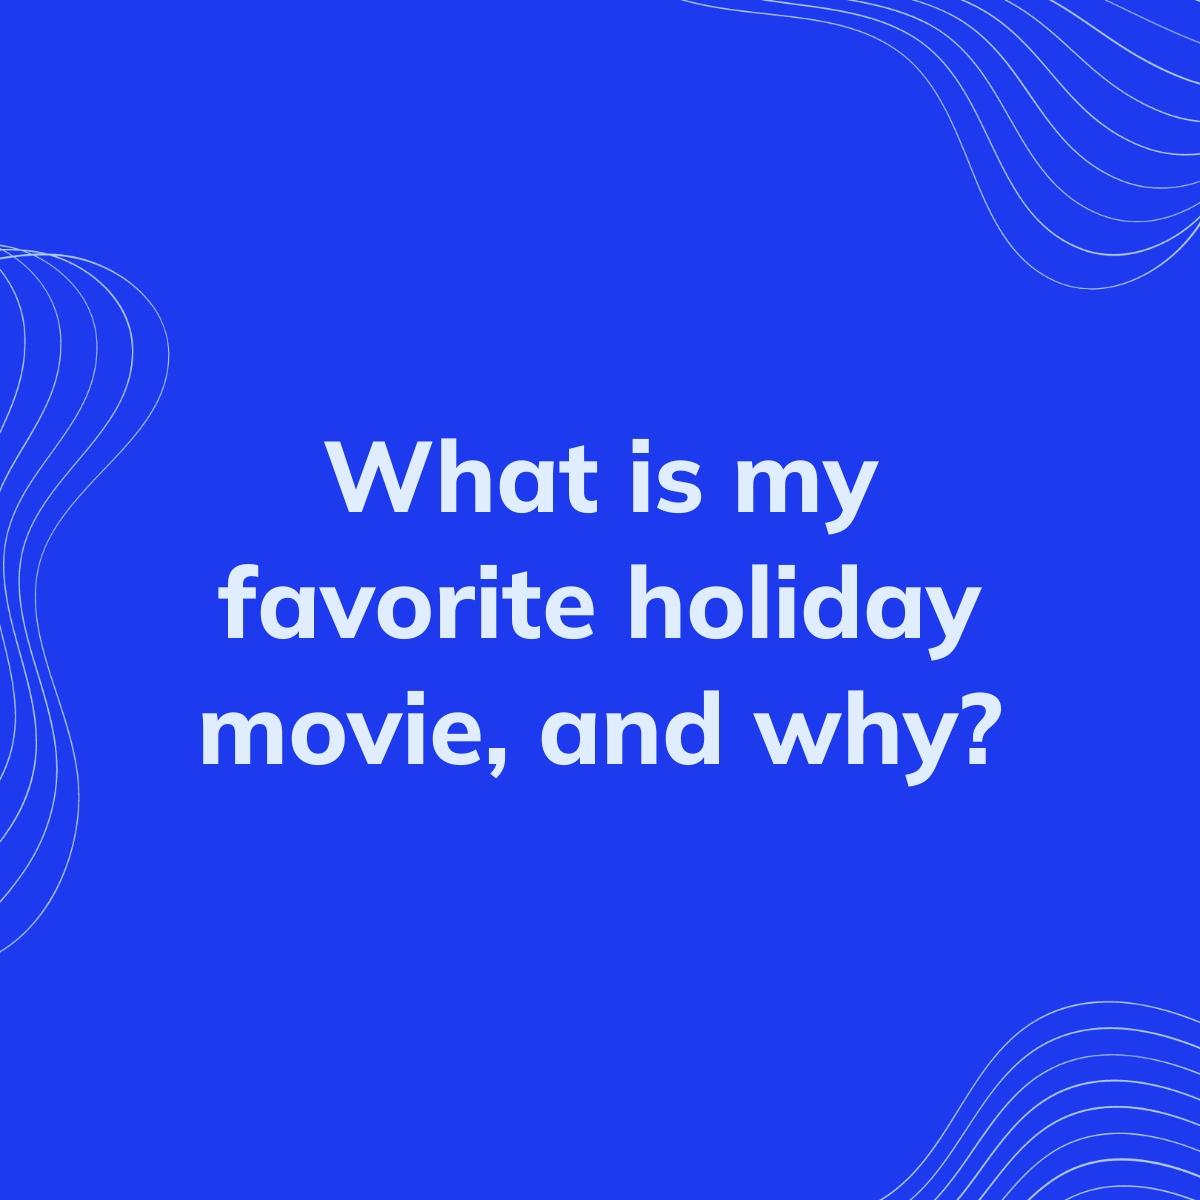 Journal Prompt: What is my favorite holiday movie, and why?